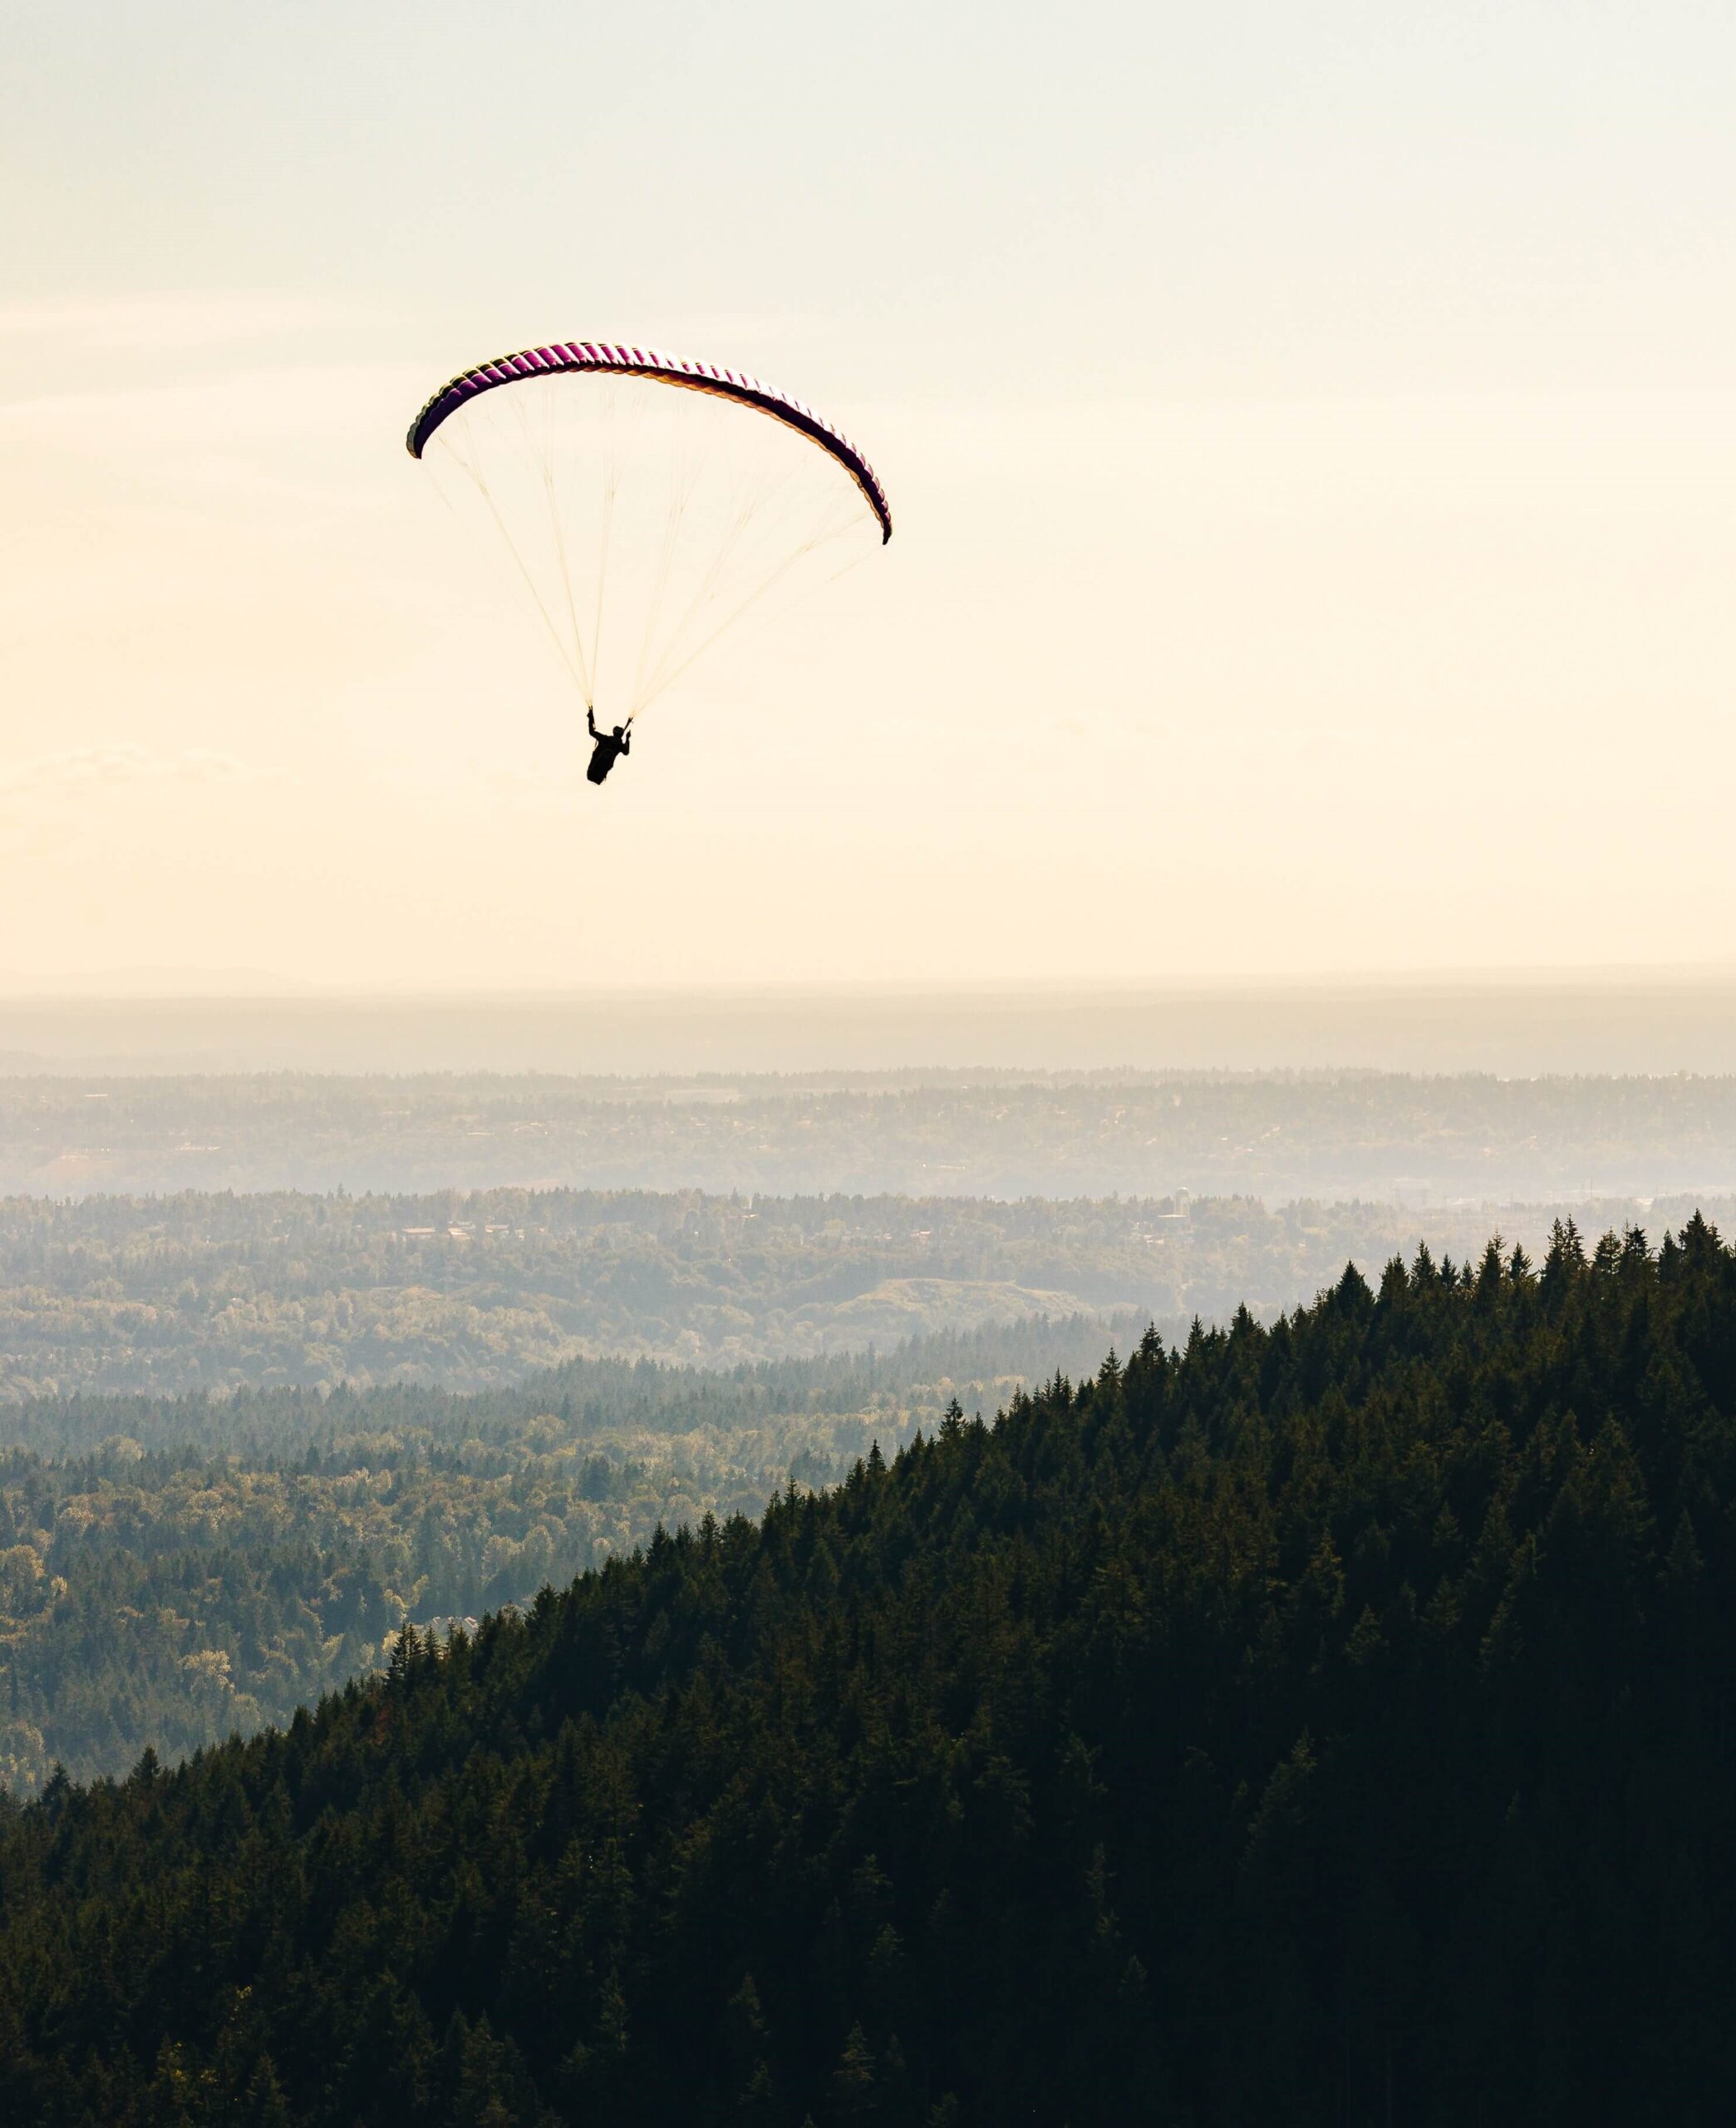 Paraglider soars over Issaquah hiking trail at sunset